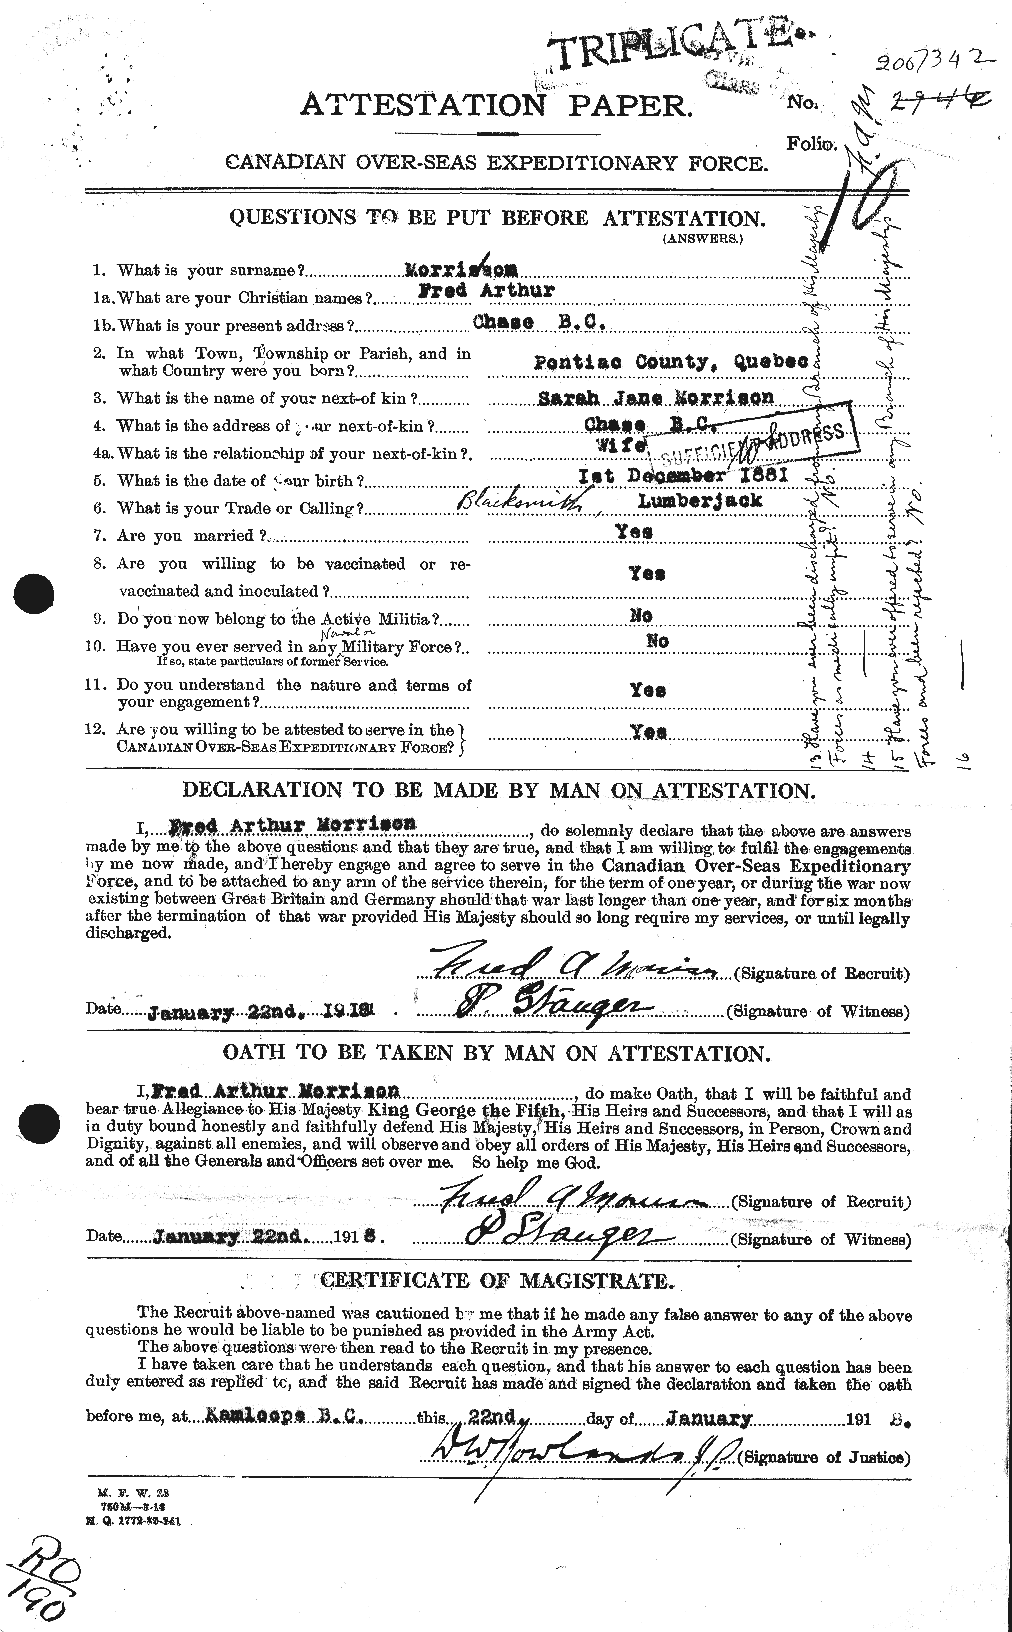 Personnel Records of the First World War - CEF 505551a